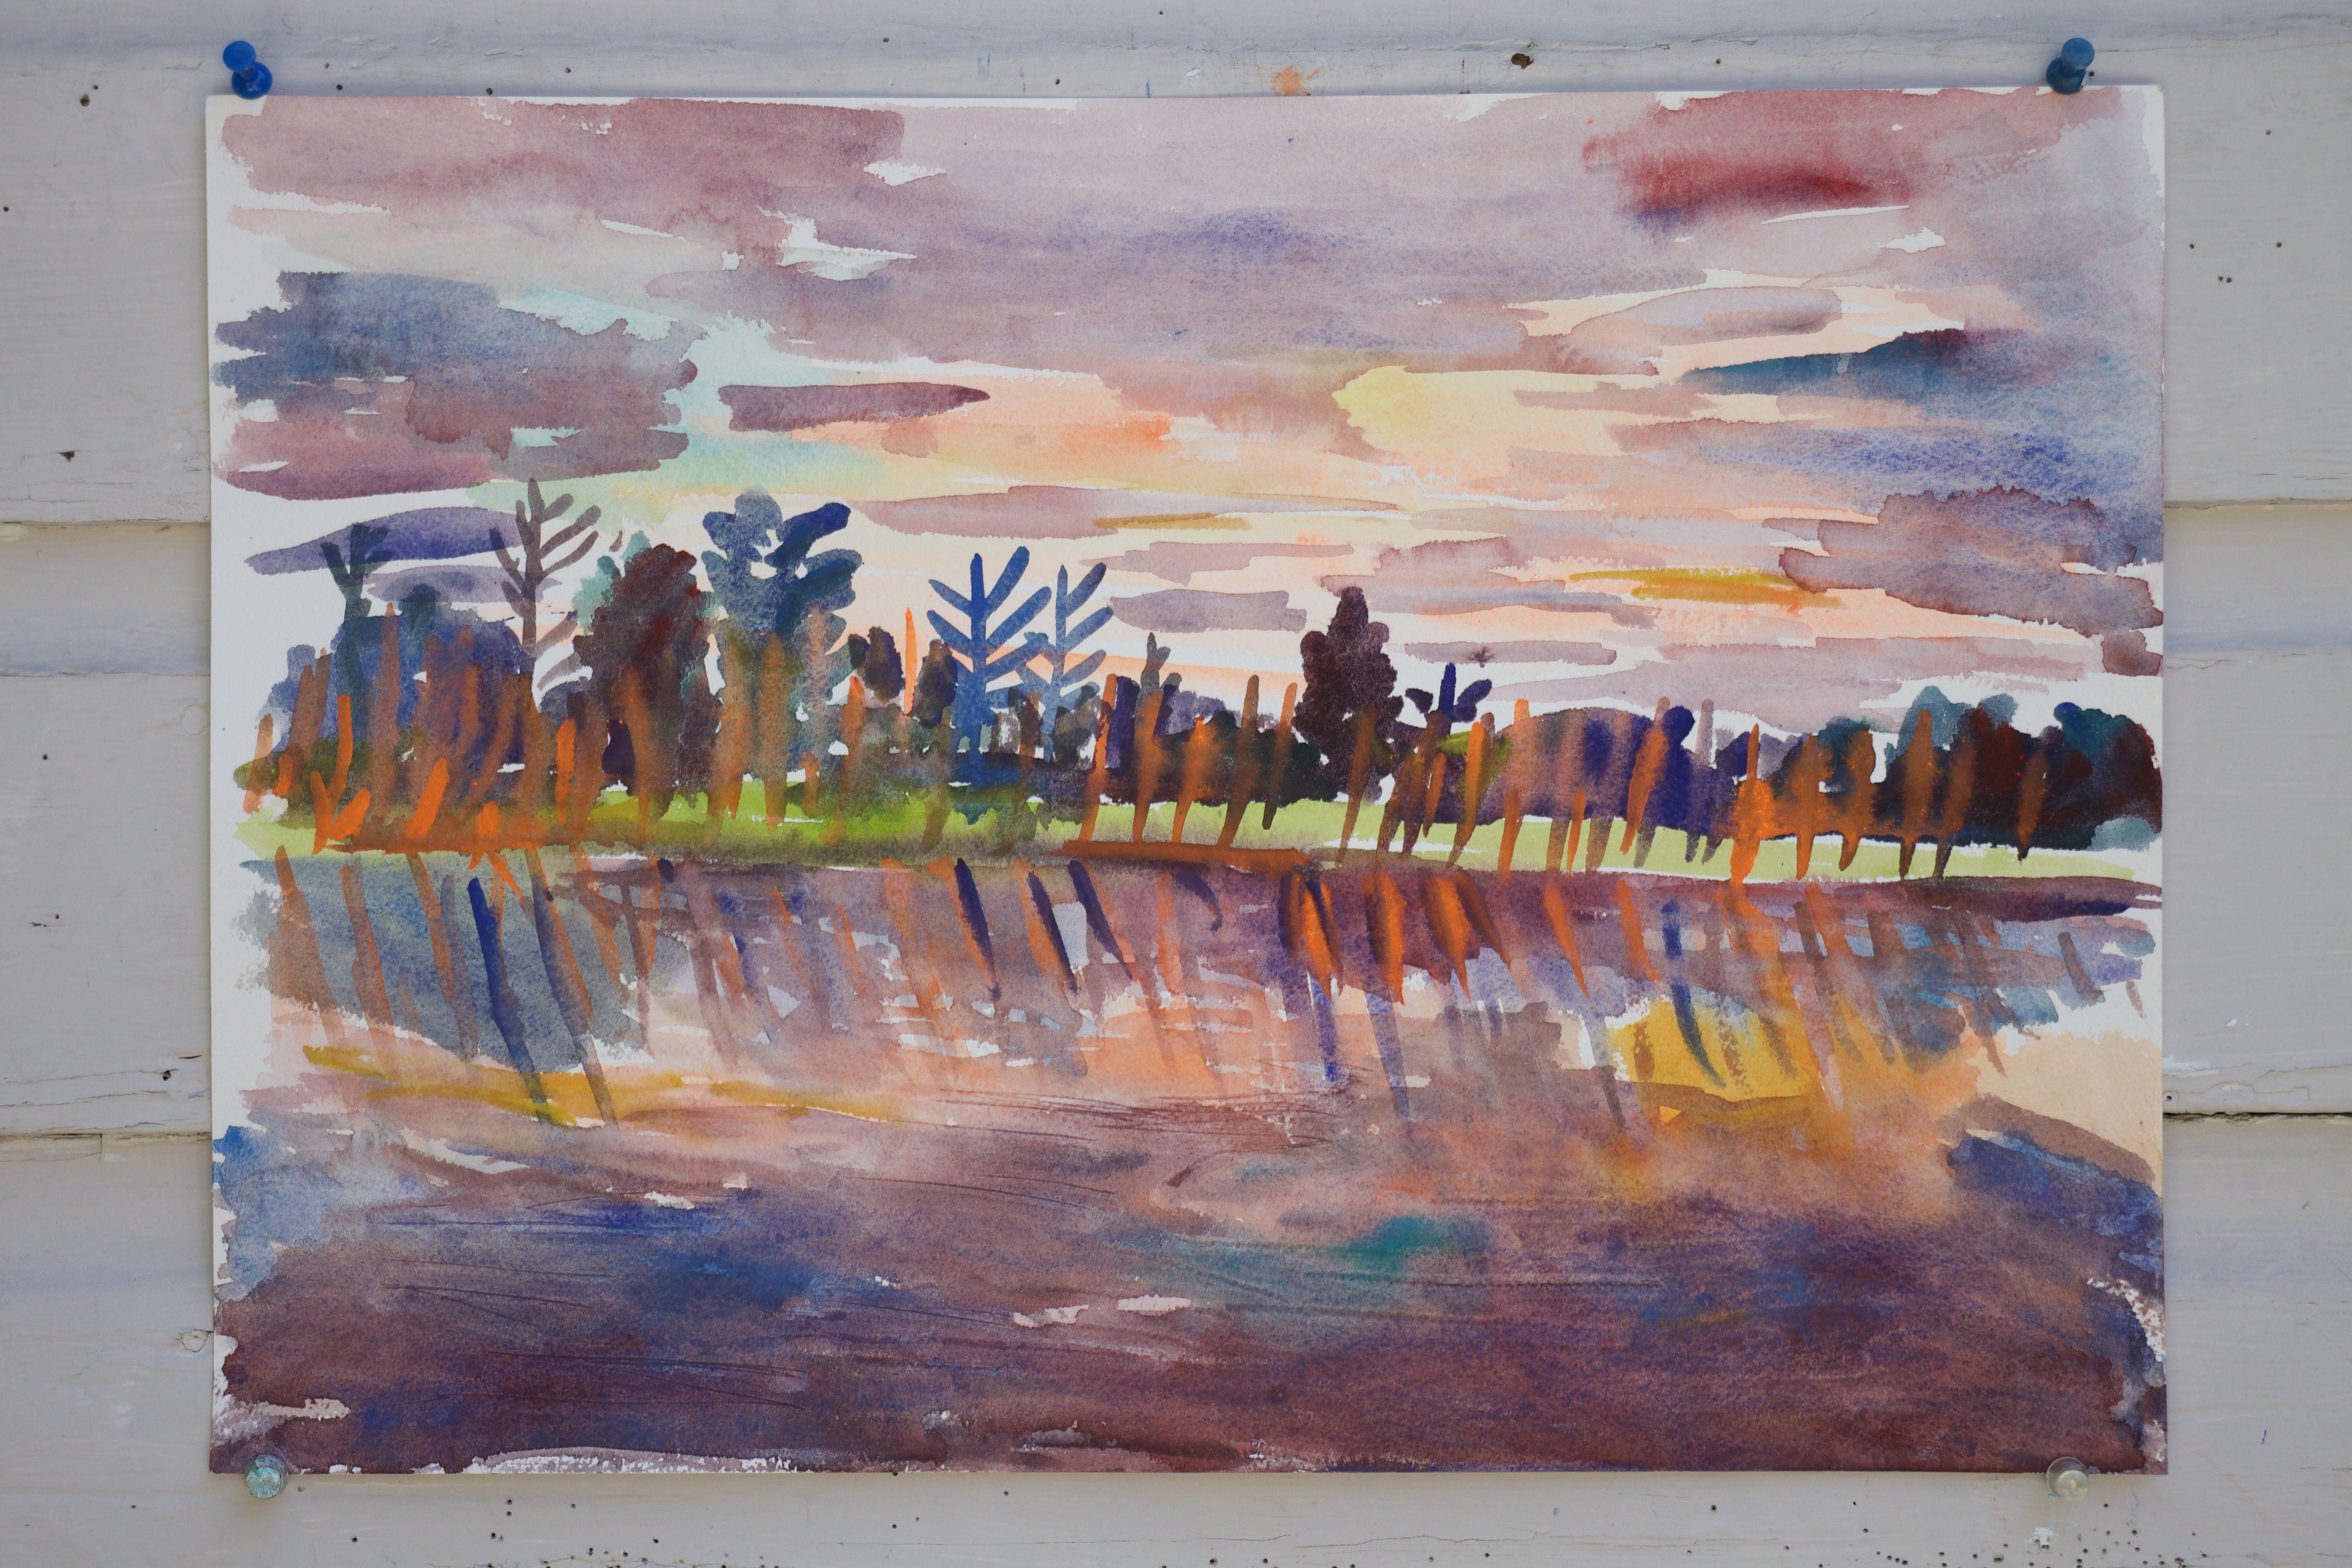 Ox-Bow Sunset, Painting, Watercolor on Watercolor Paper - Impressionist Art by John Kilduff